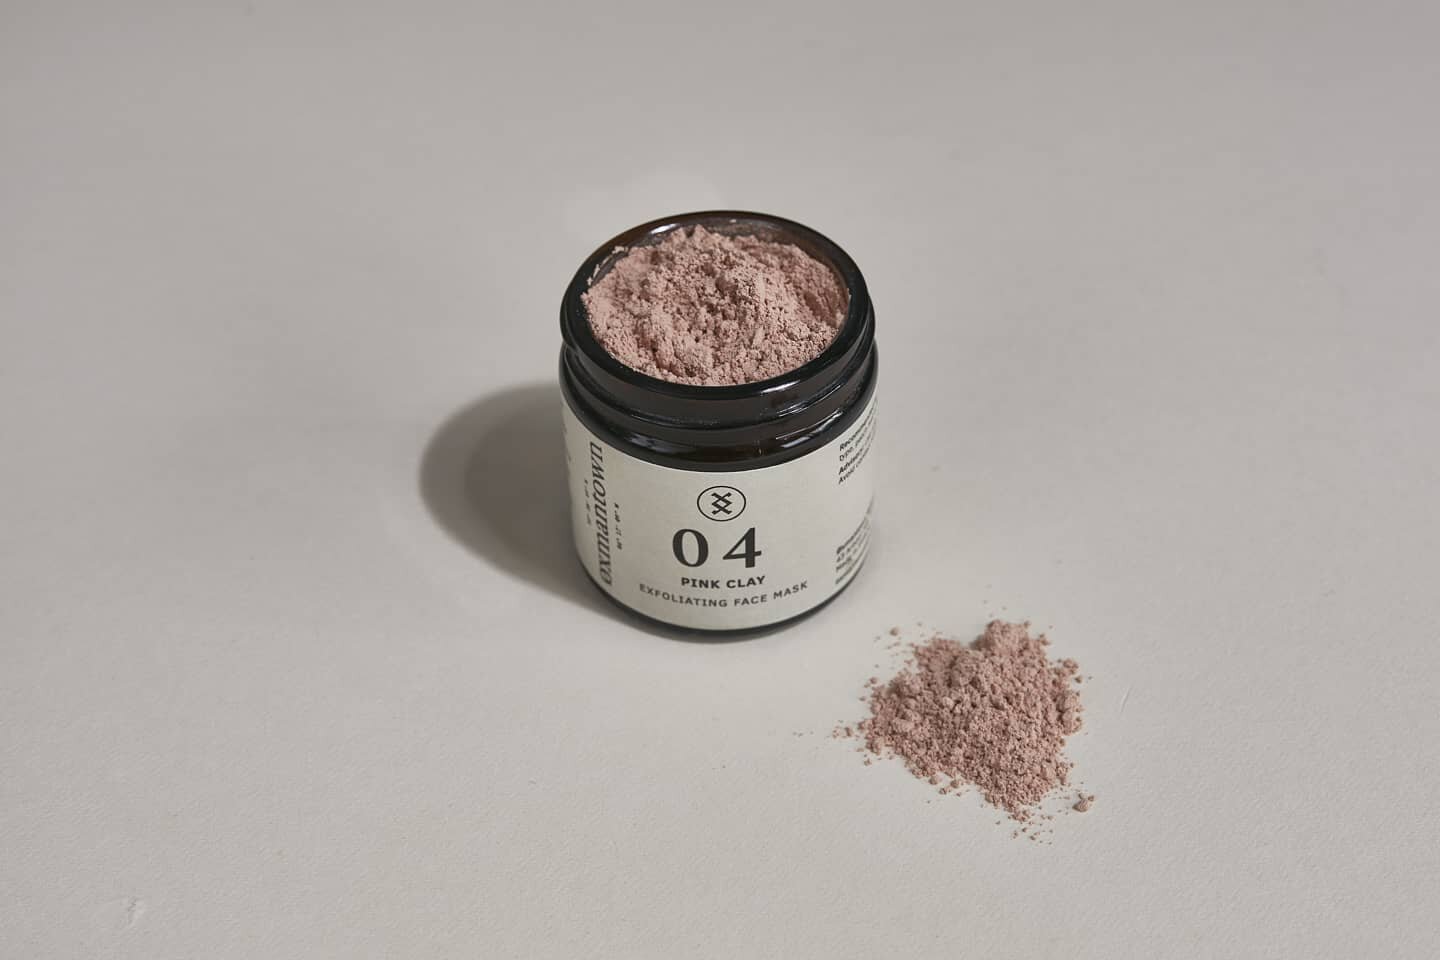 N&Oslash;.4 Pink Clay Exfoliating Mask

A gentle yet effective exfoliating mask formulated with Pink Clay &amp; botanical extracts. Designed to nourish and brighten the skin, shedding away dead skin cells.

This mask is designed to be activated at ho